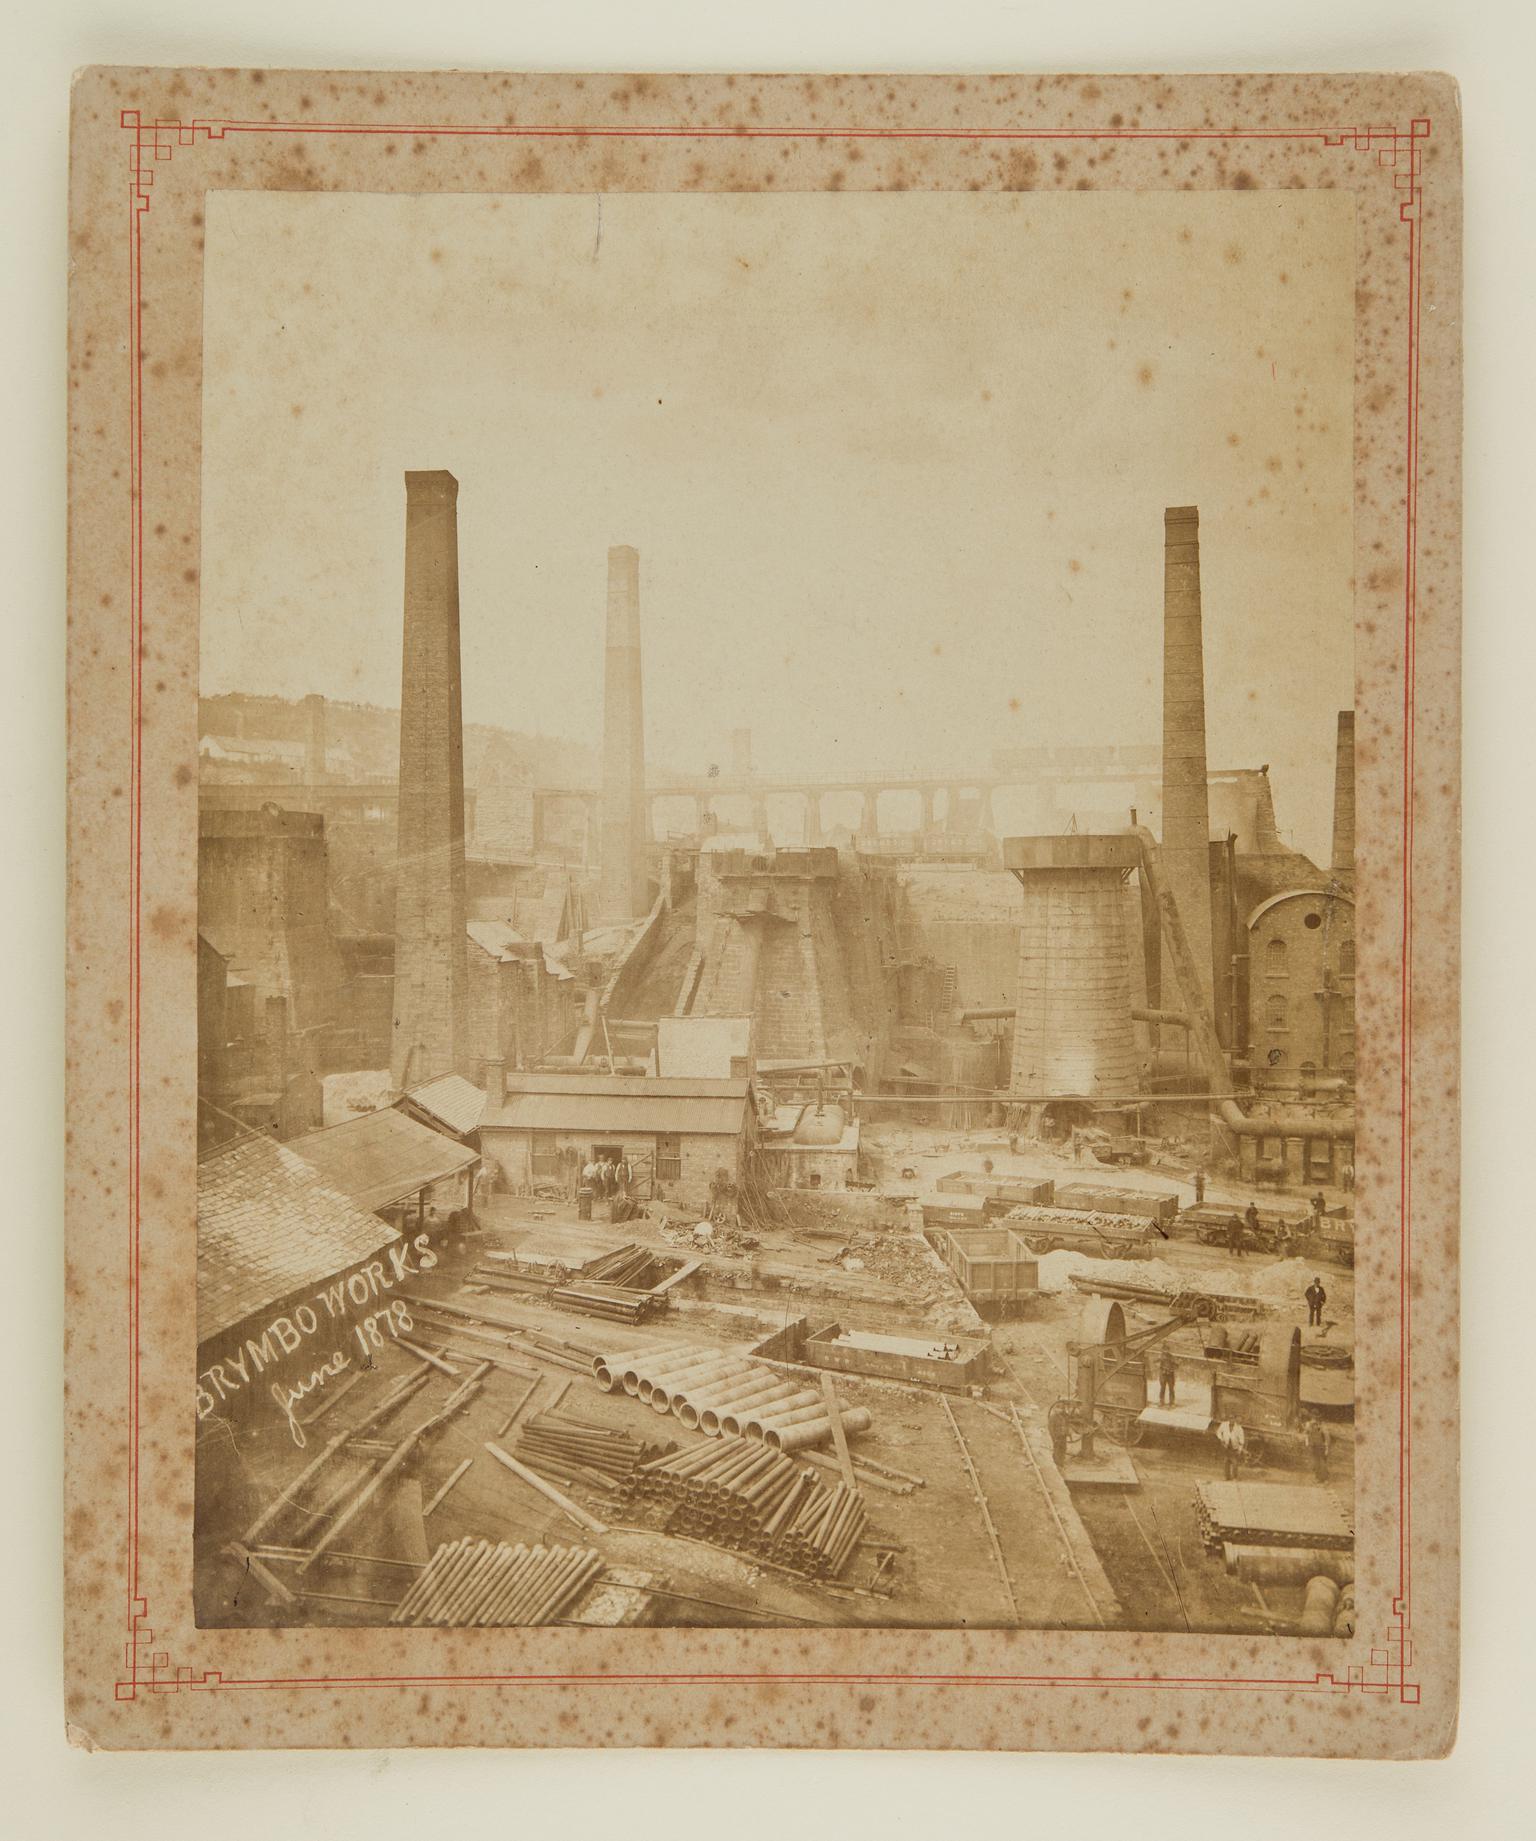 Brymbo steelworks, photograph